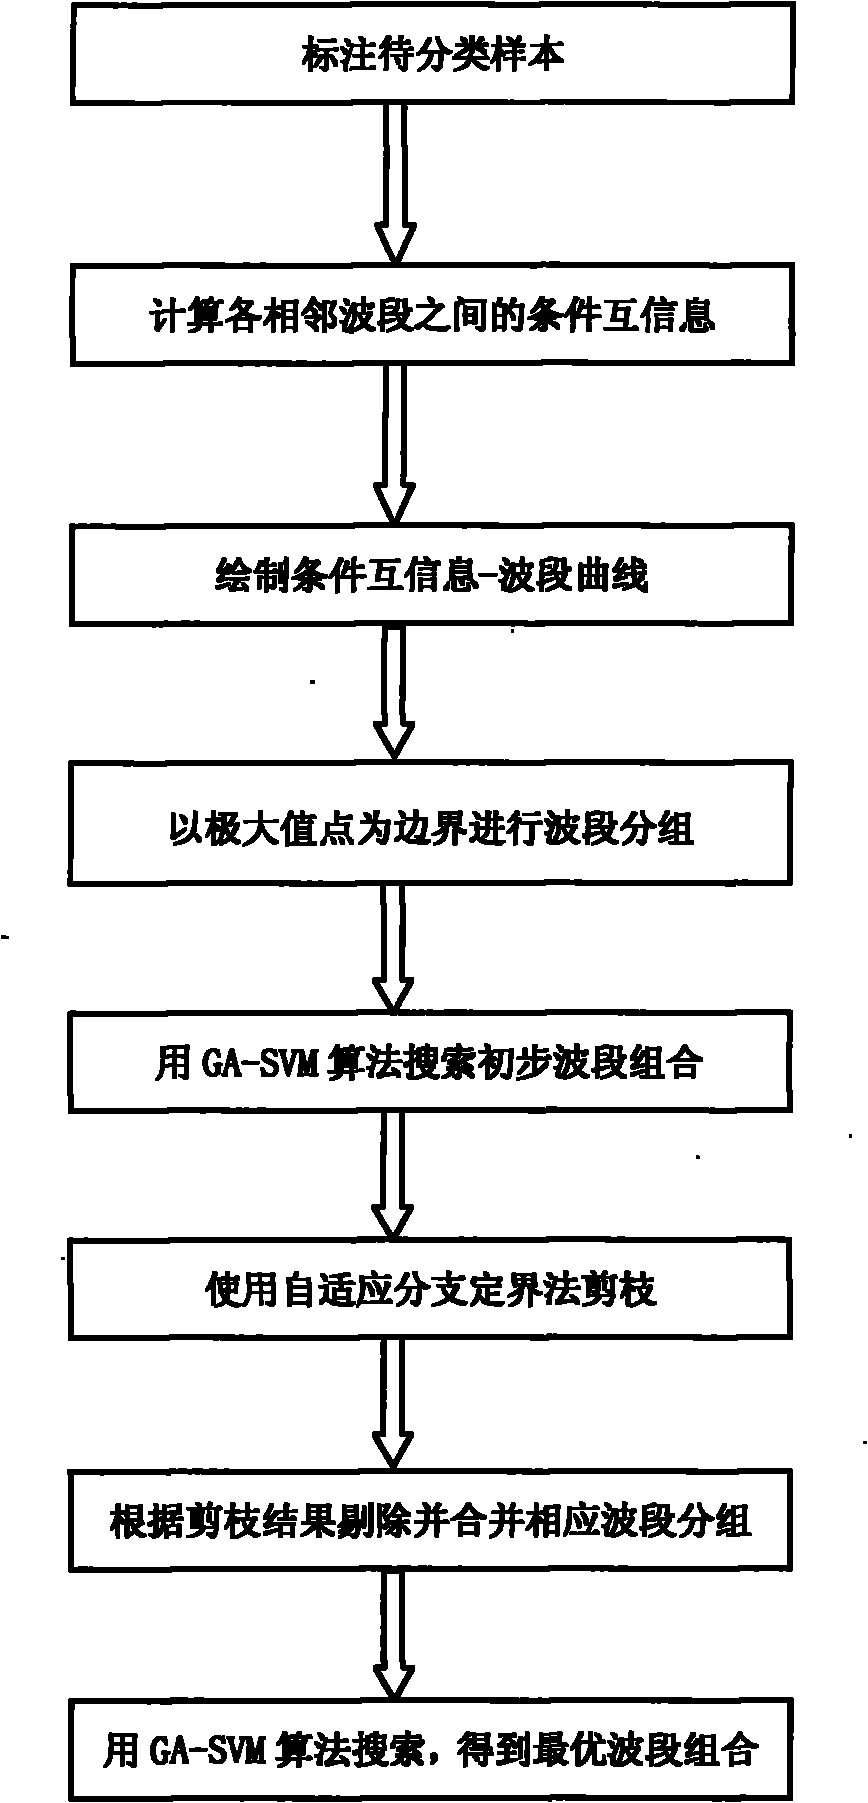 Remote sensing hyperspectral image band selection method based on conditional mutual information